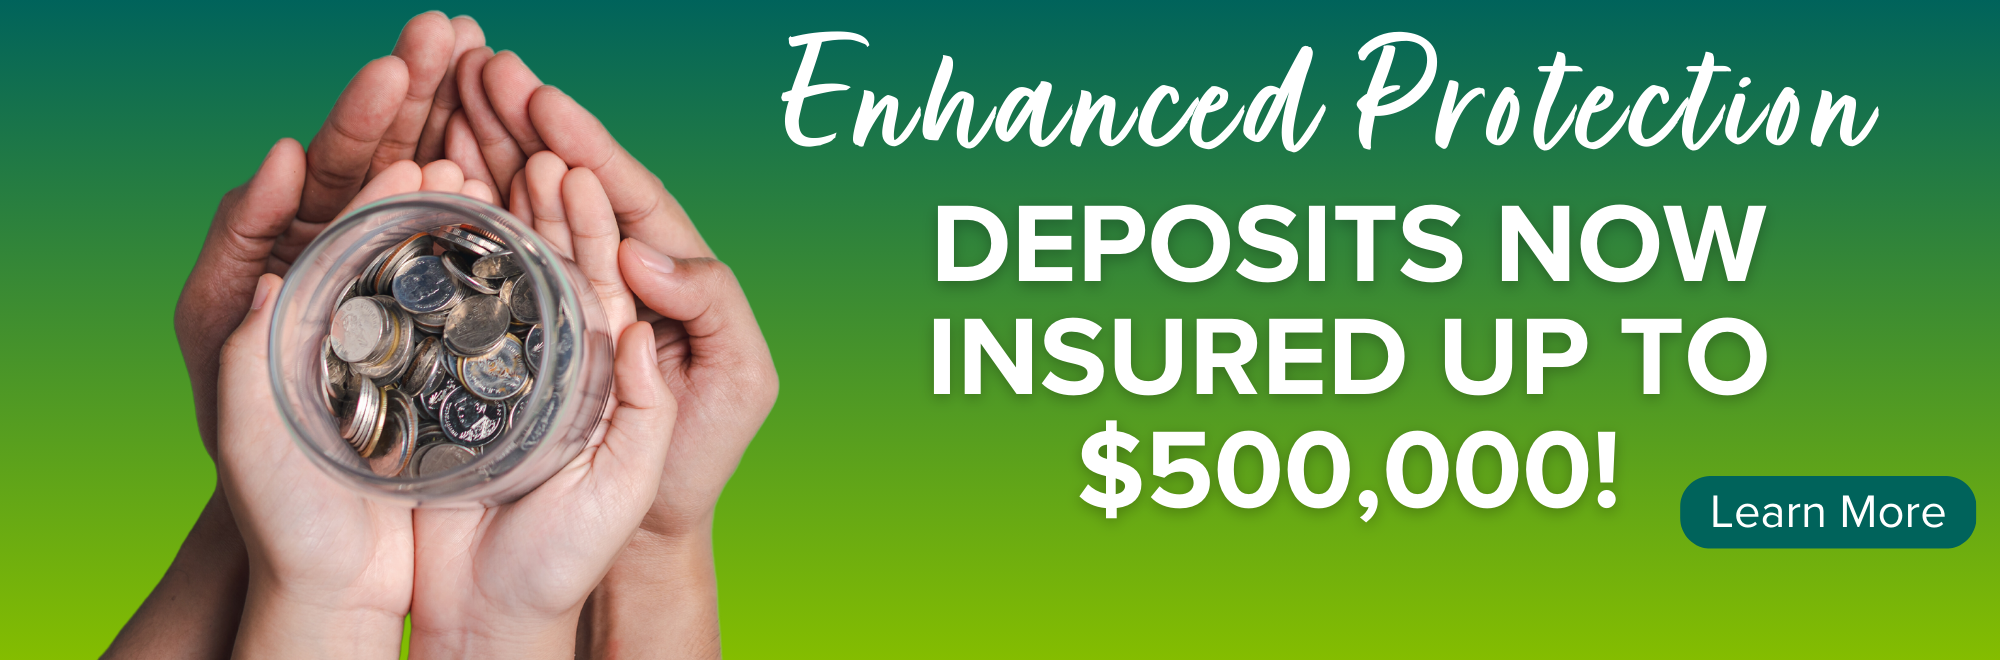 Deposits now insured up to $500,000